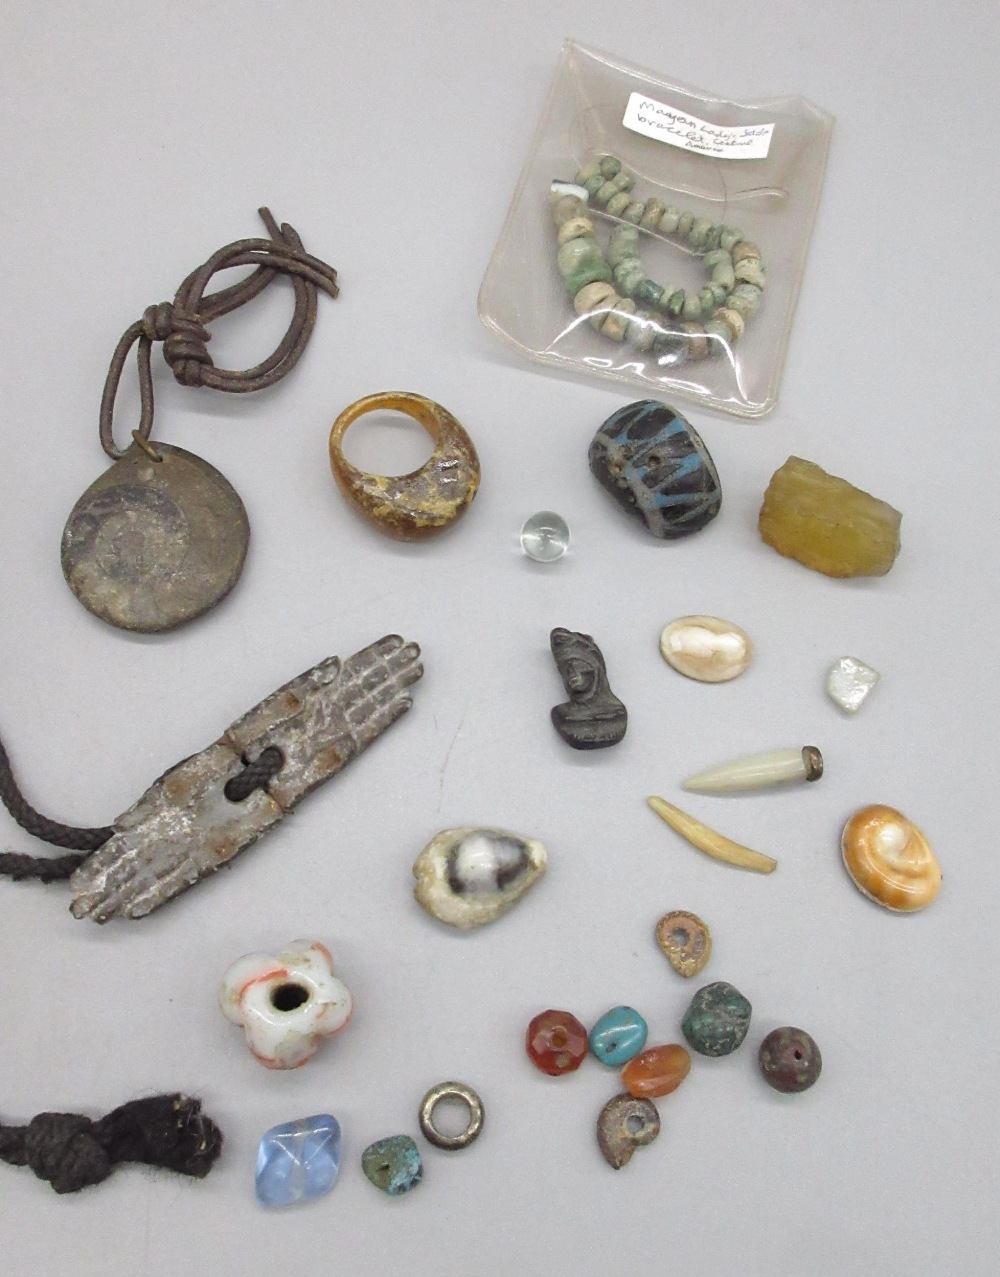 Bust pendant engraved SK, a cameo, a jade bracelet, and a collection of ancient beads and carved - Image 2 of 3